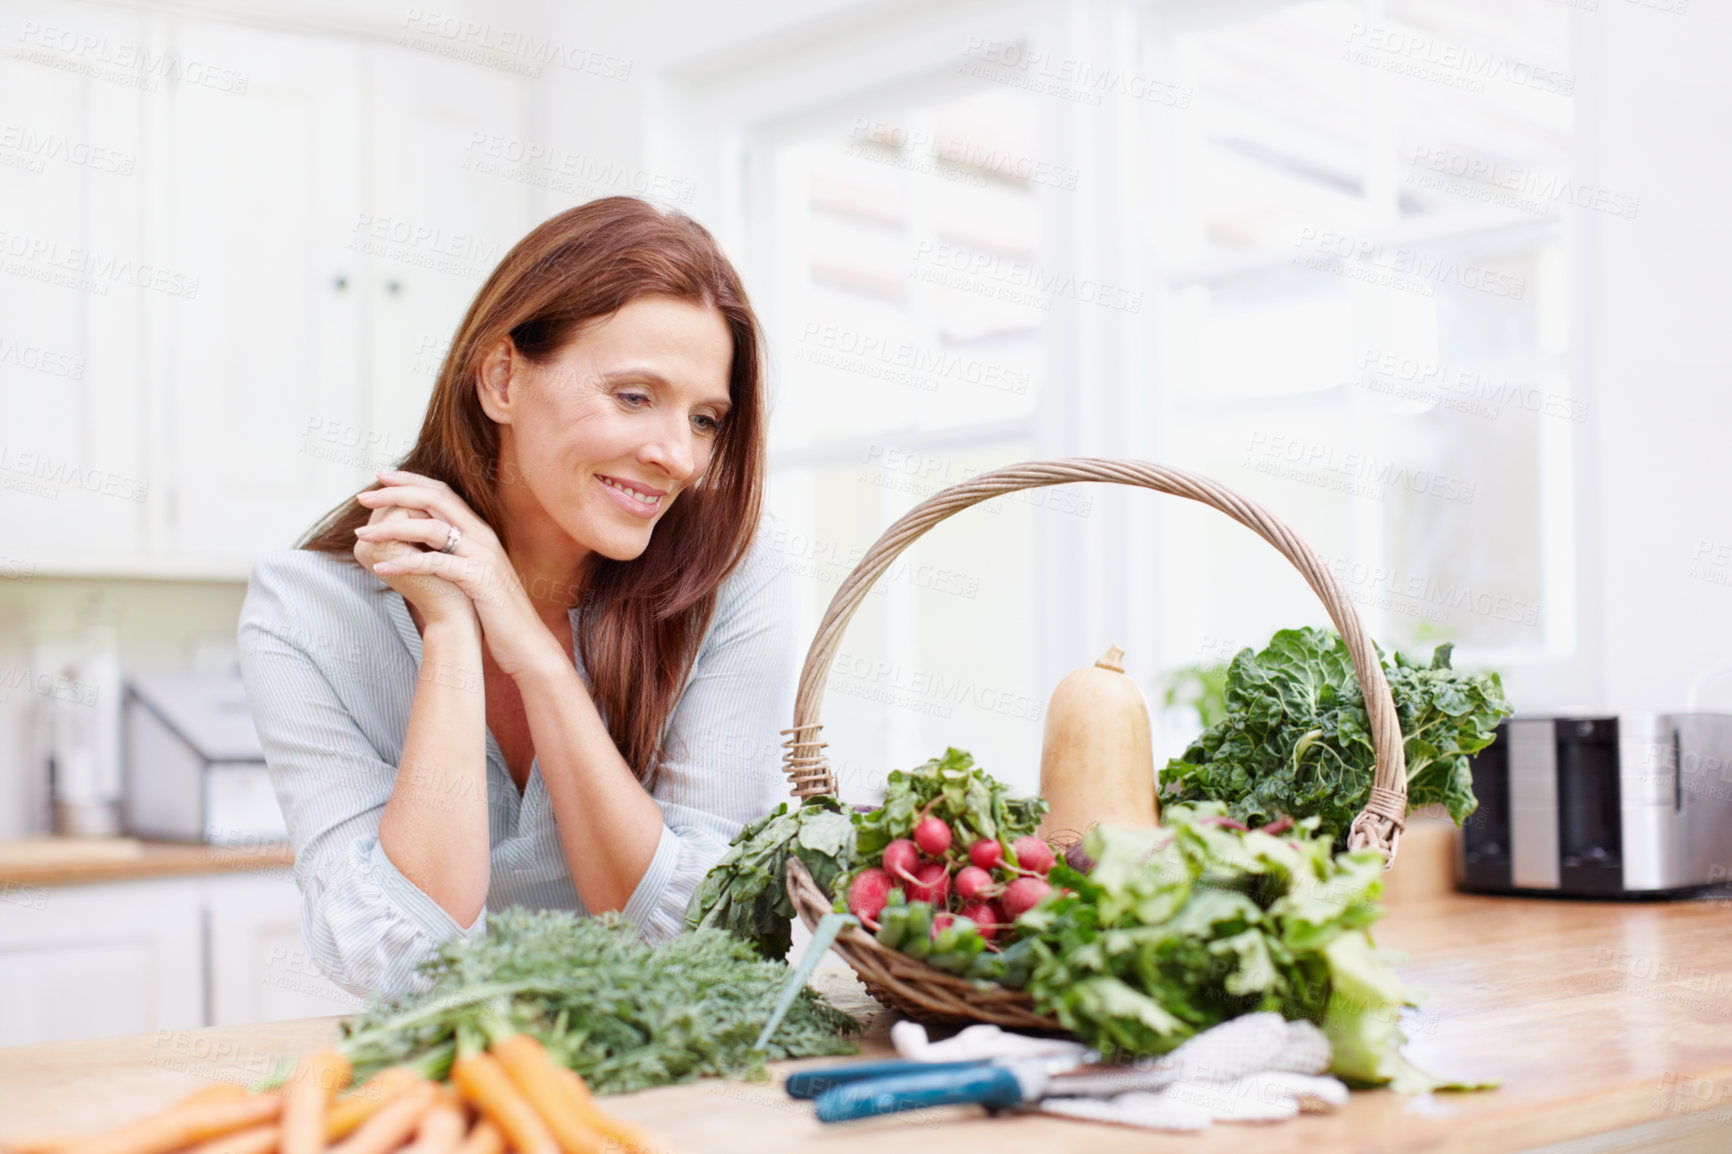 Buy stock photo A beautiful woman leans on her kitchen counter while looking at a basket of fresh vegetables